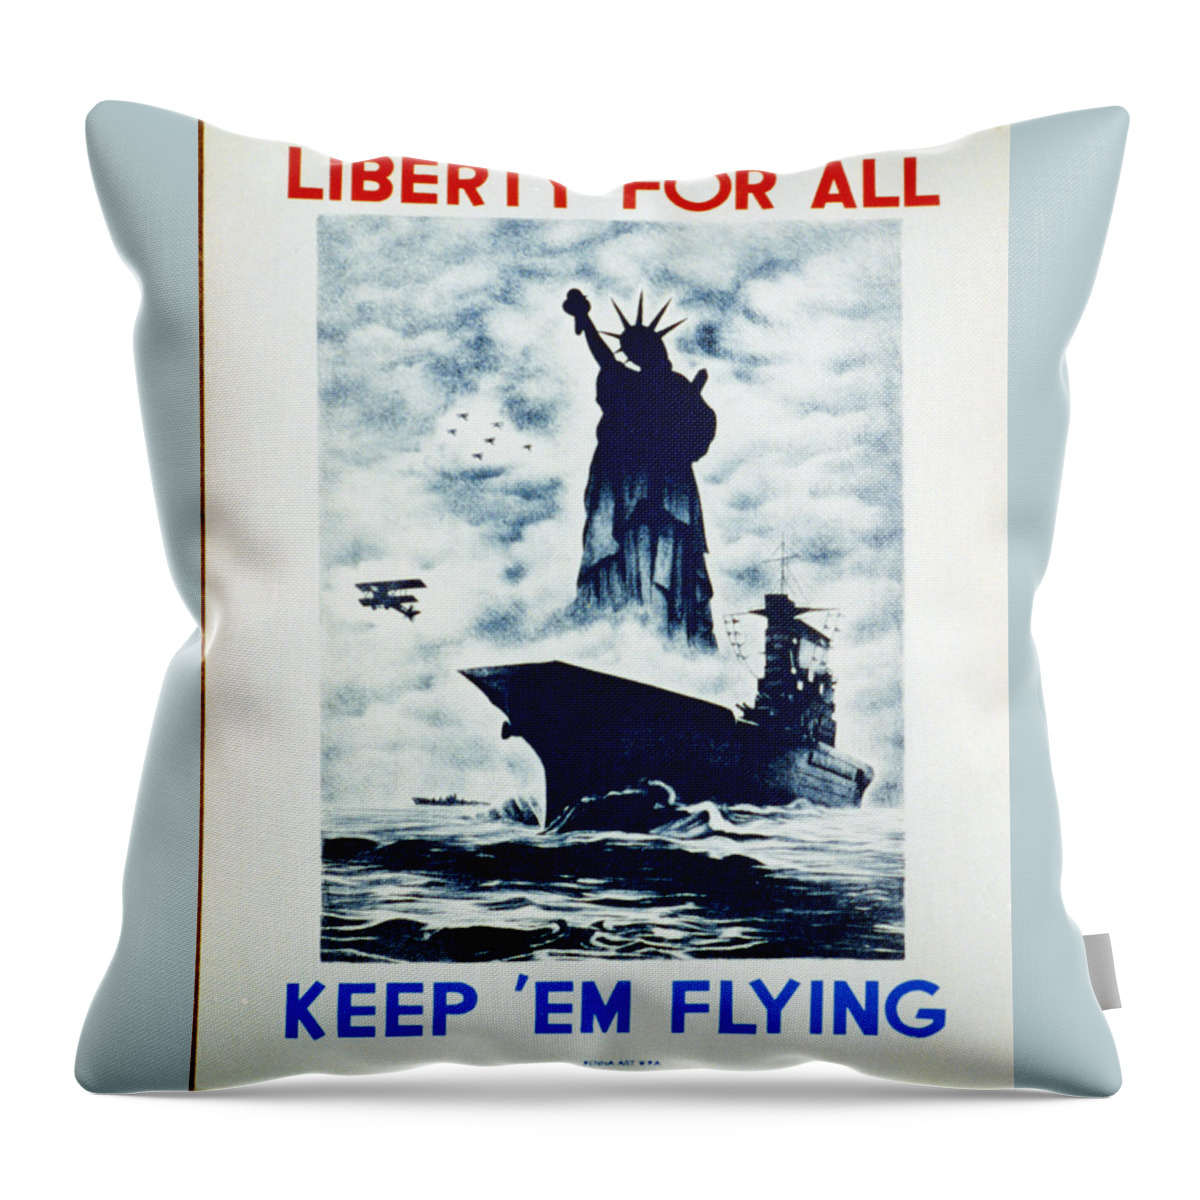 Liberty For All Keep 'em Flying. Sea Throw Pillow featuring the painting Liberty for all Keep em flying by MotionAge Designs